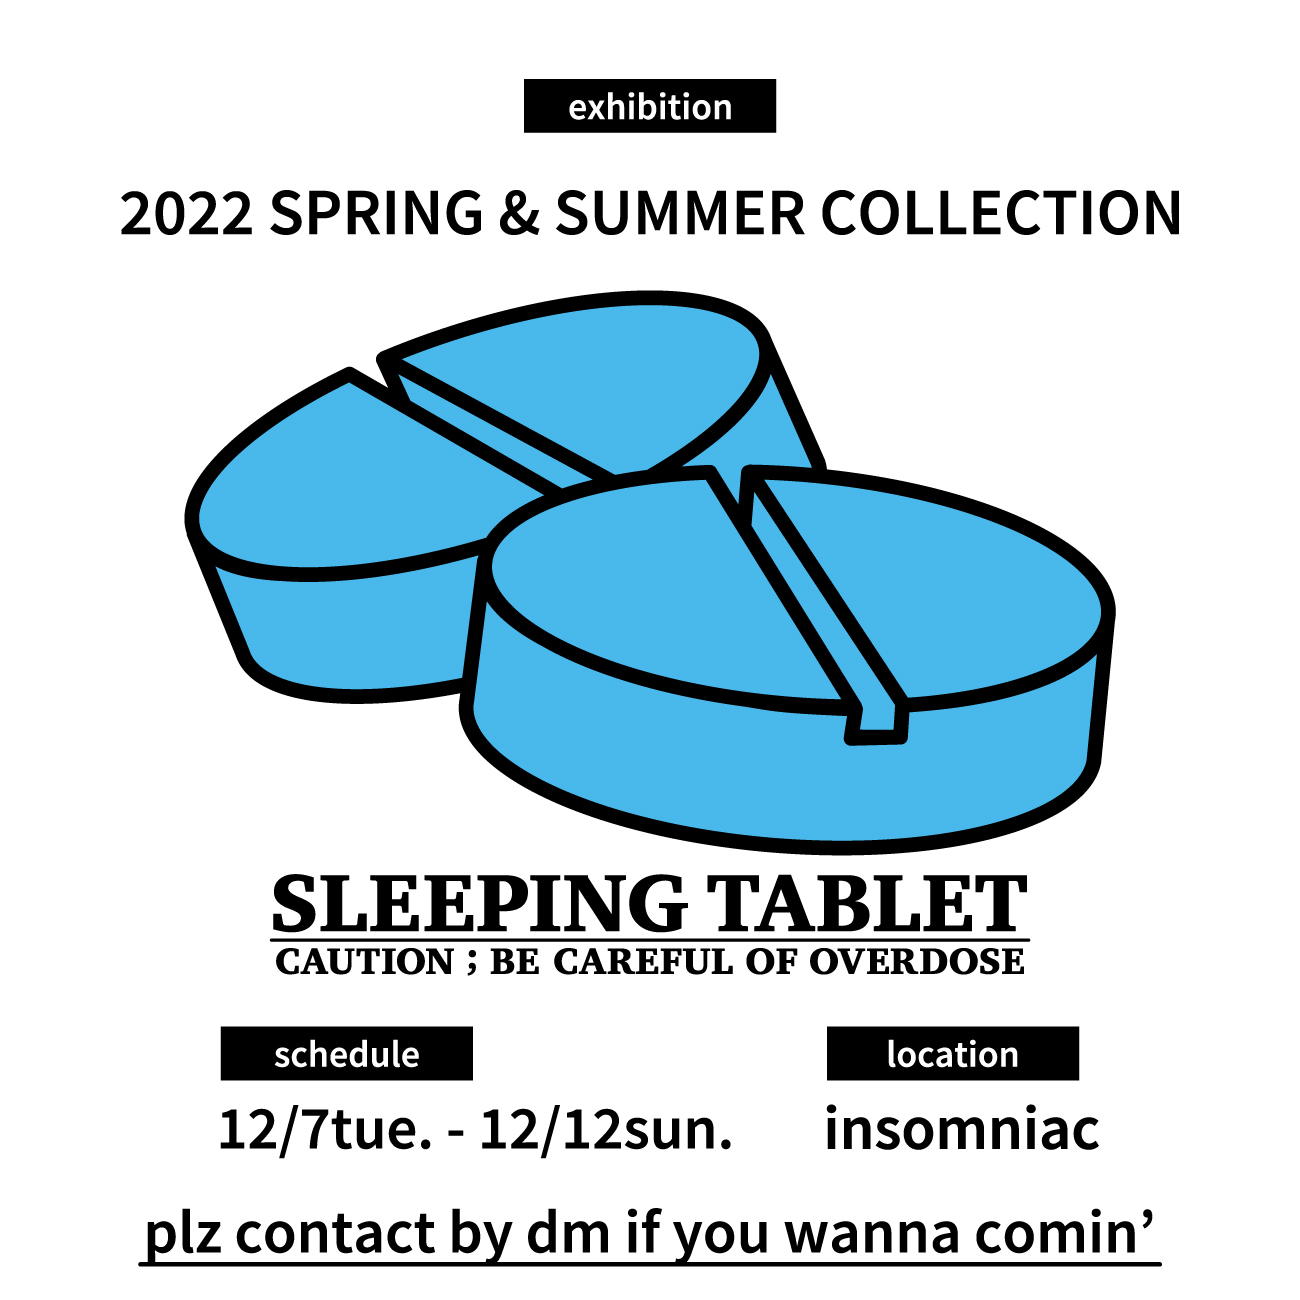 SLEEPING TABLET 2022 SPRING & SUMMER COLLECTION